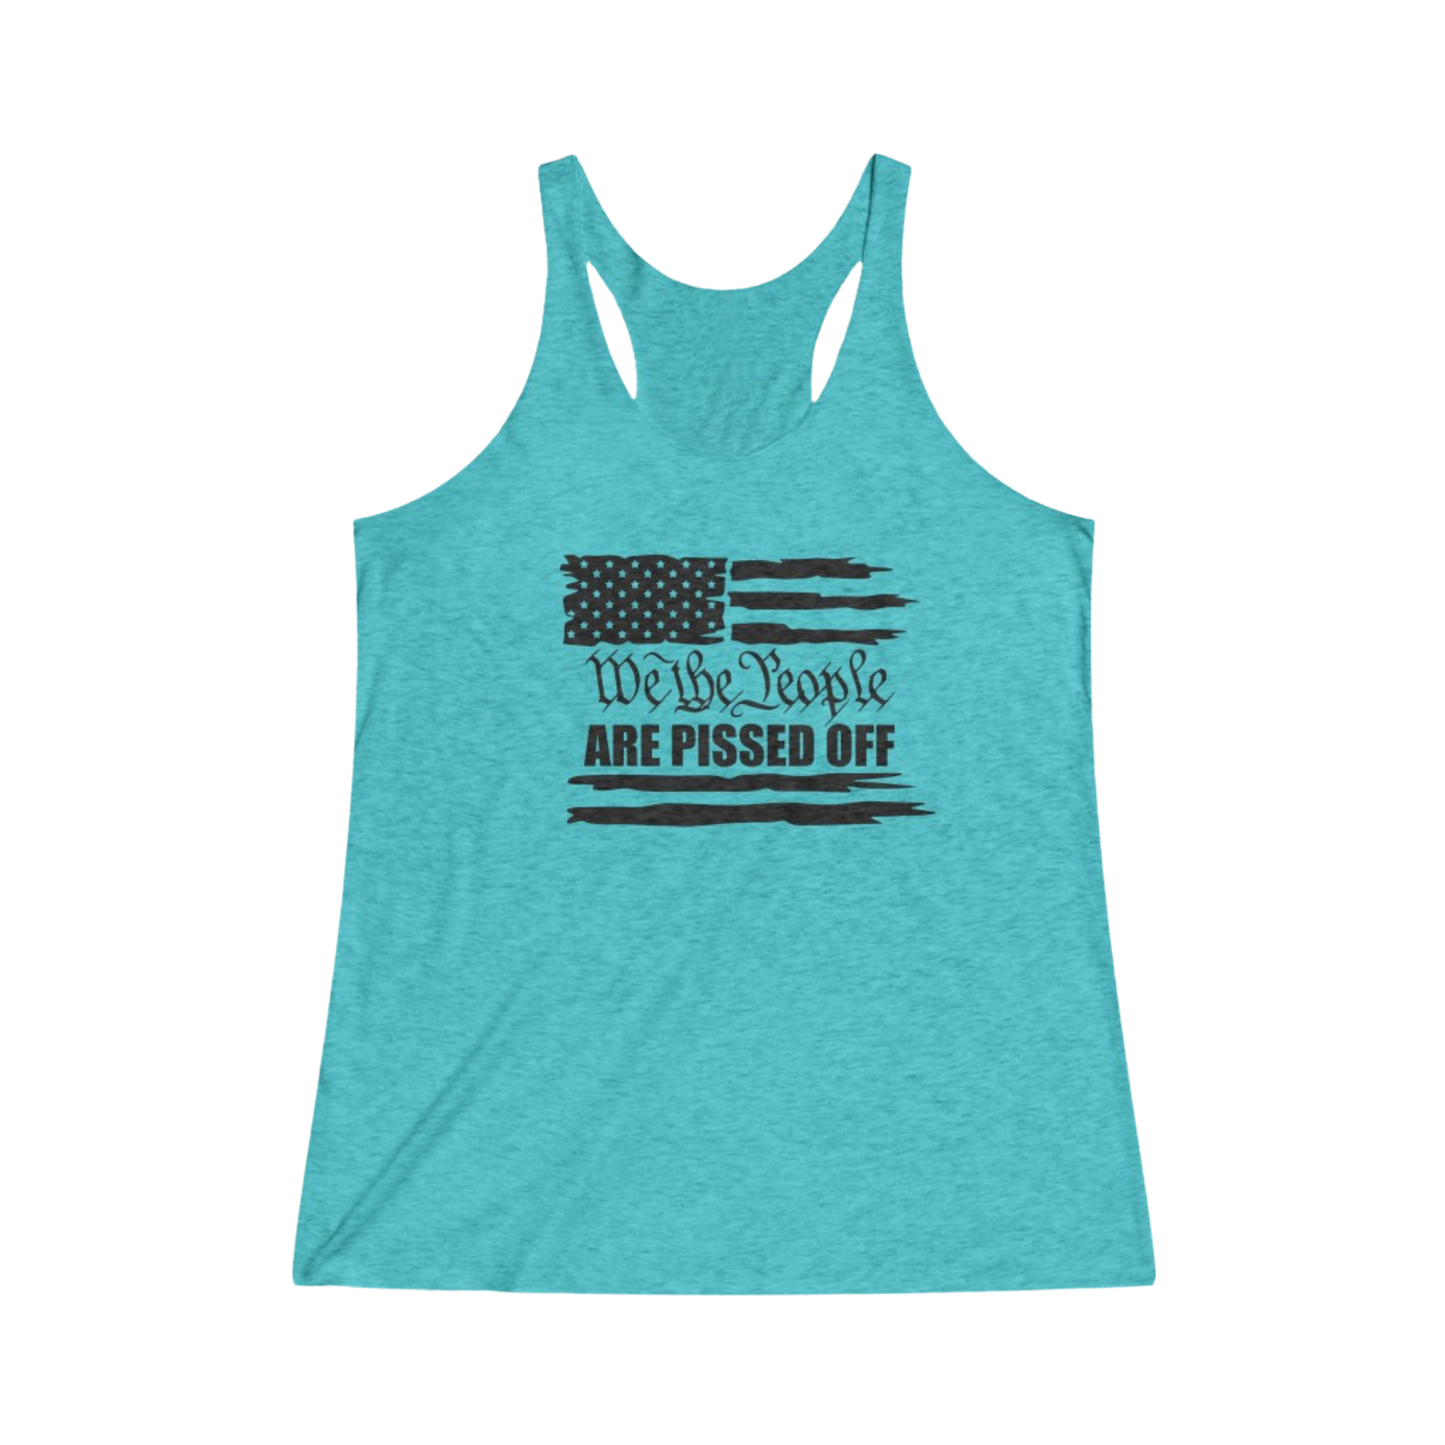 We The People Are Pissed Off Thin Racerback Tank Women's Tahiti Blue - front